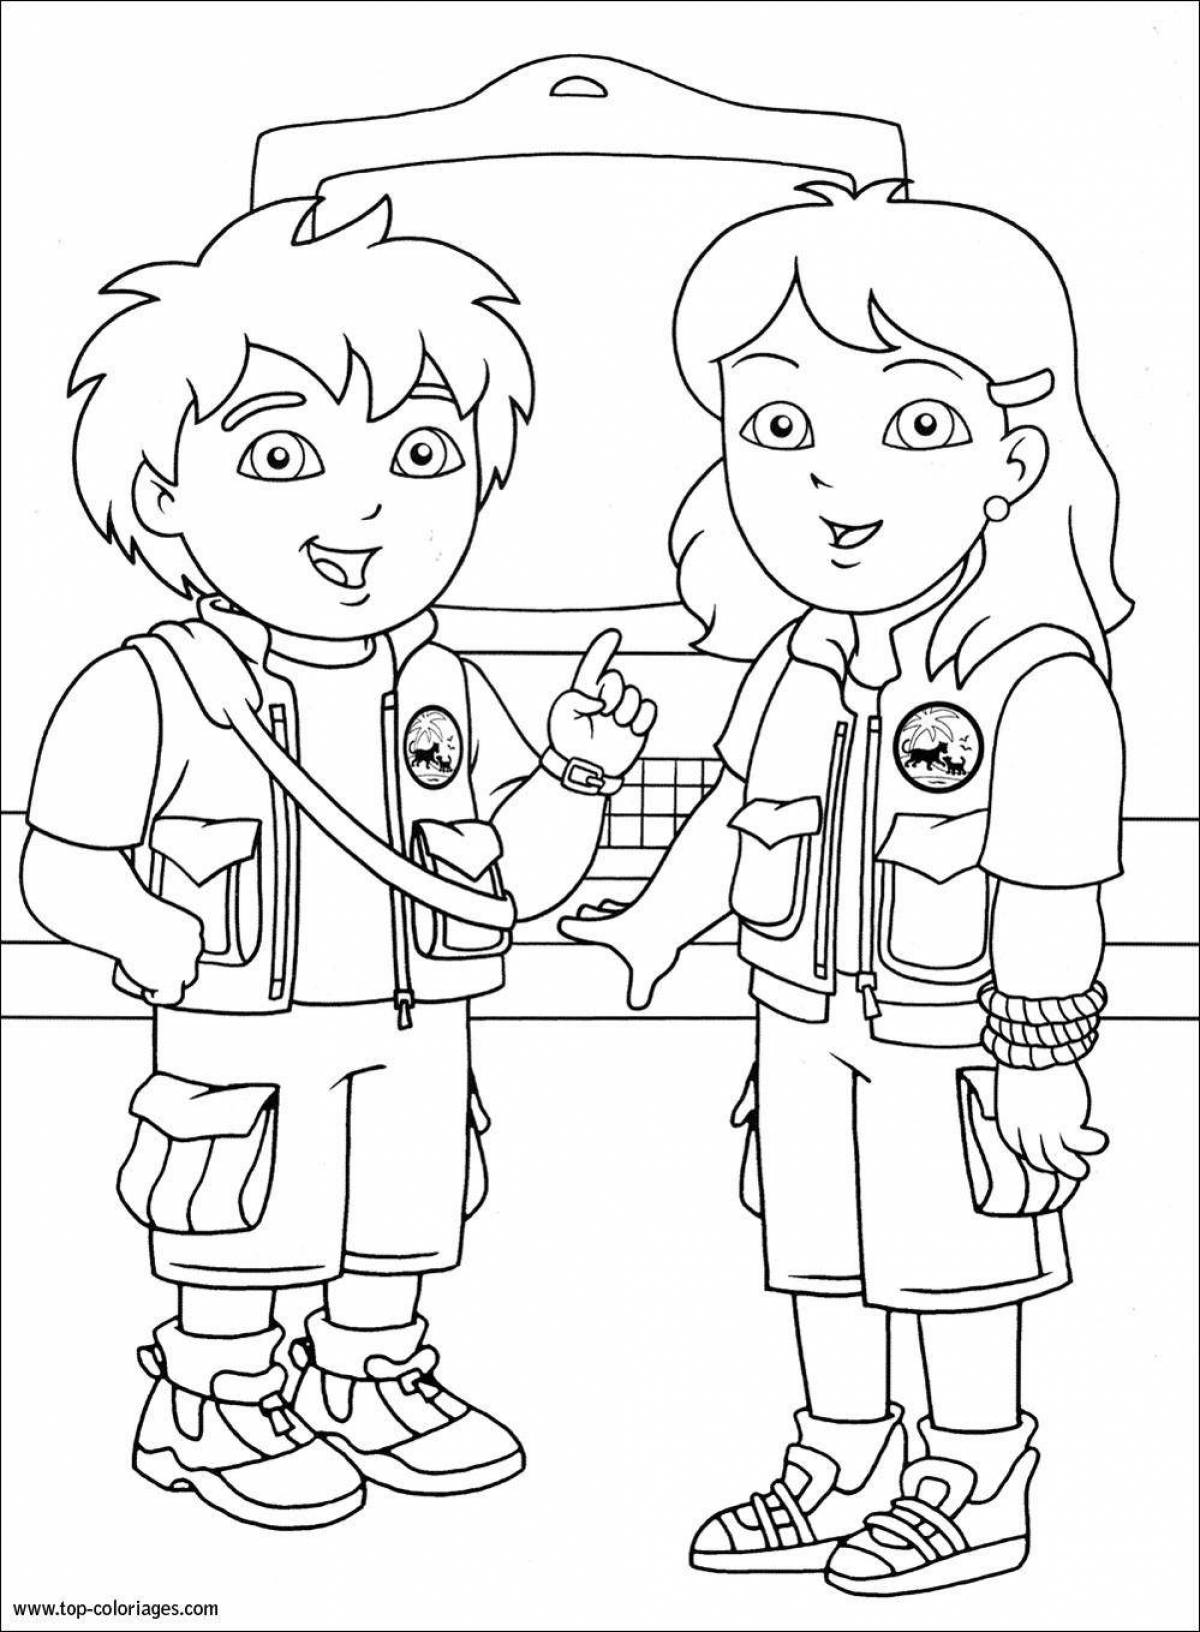 Diego go's cute coloring page